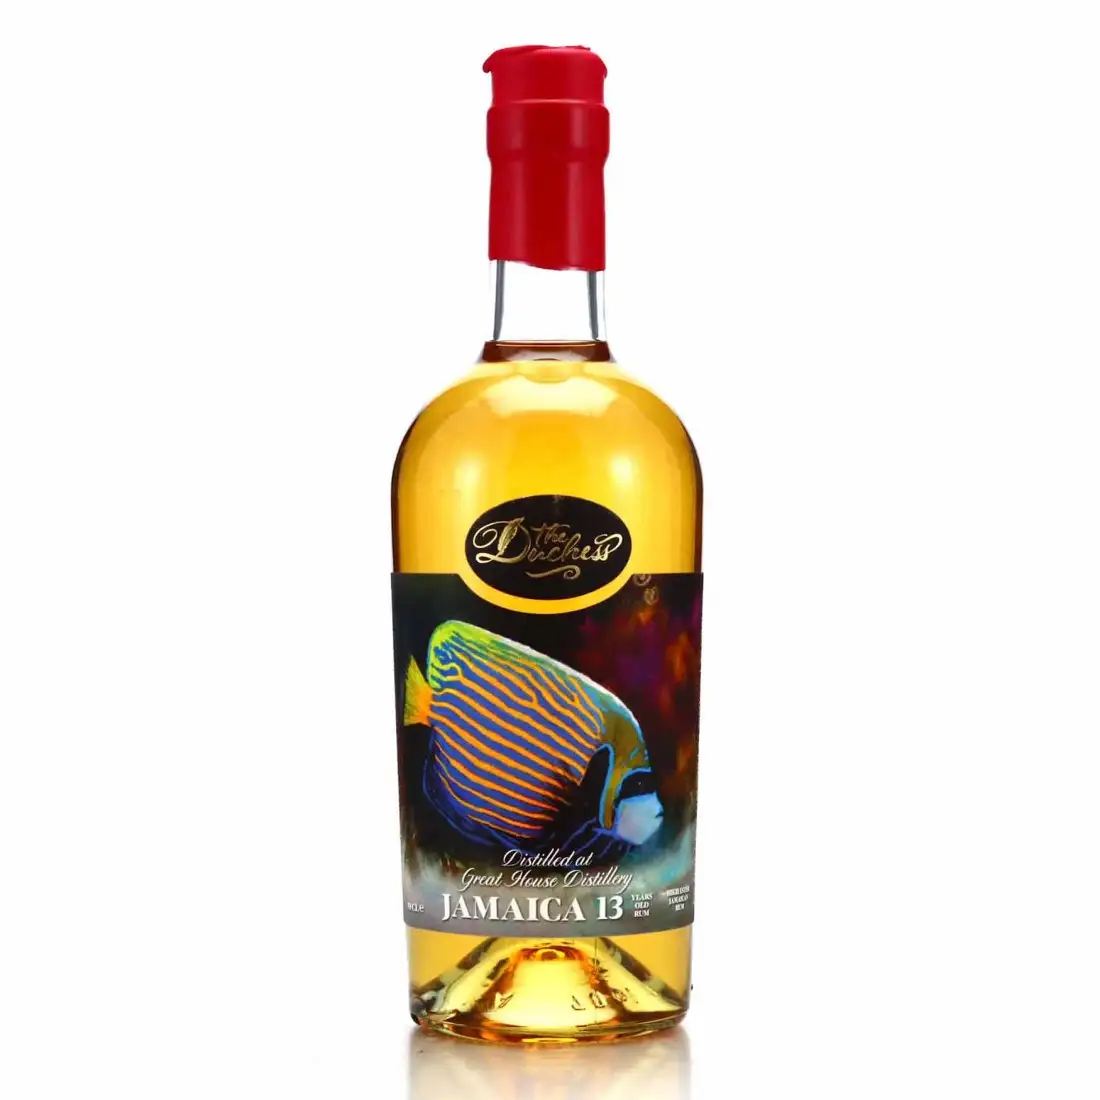 Image of the front of the bottle of the rum Jamaica 13 (Great House) C<>H